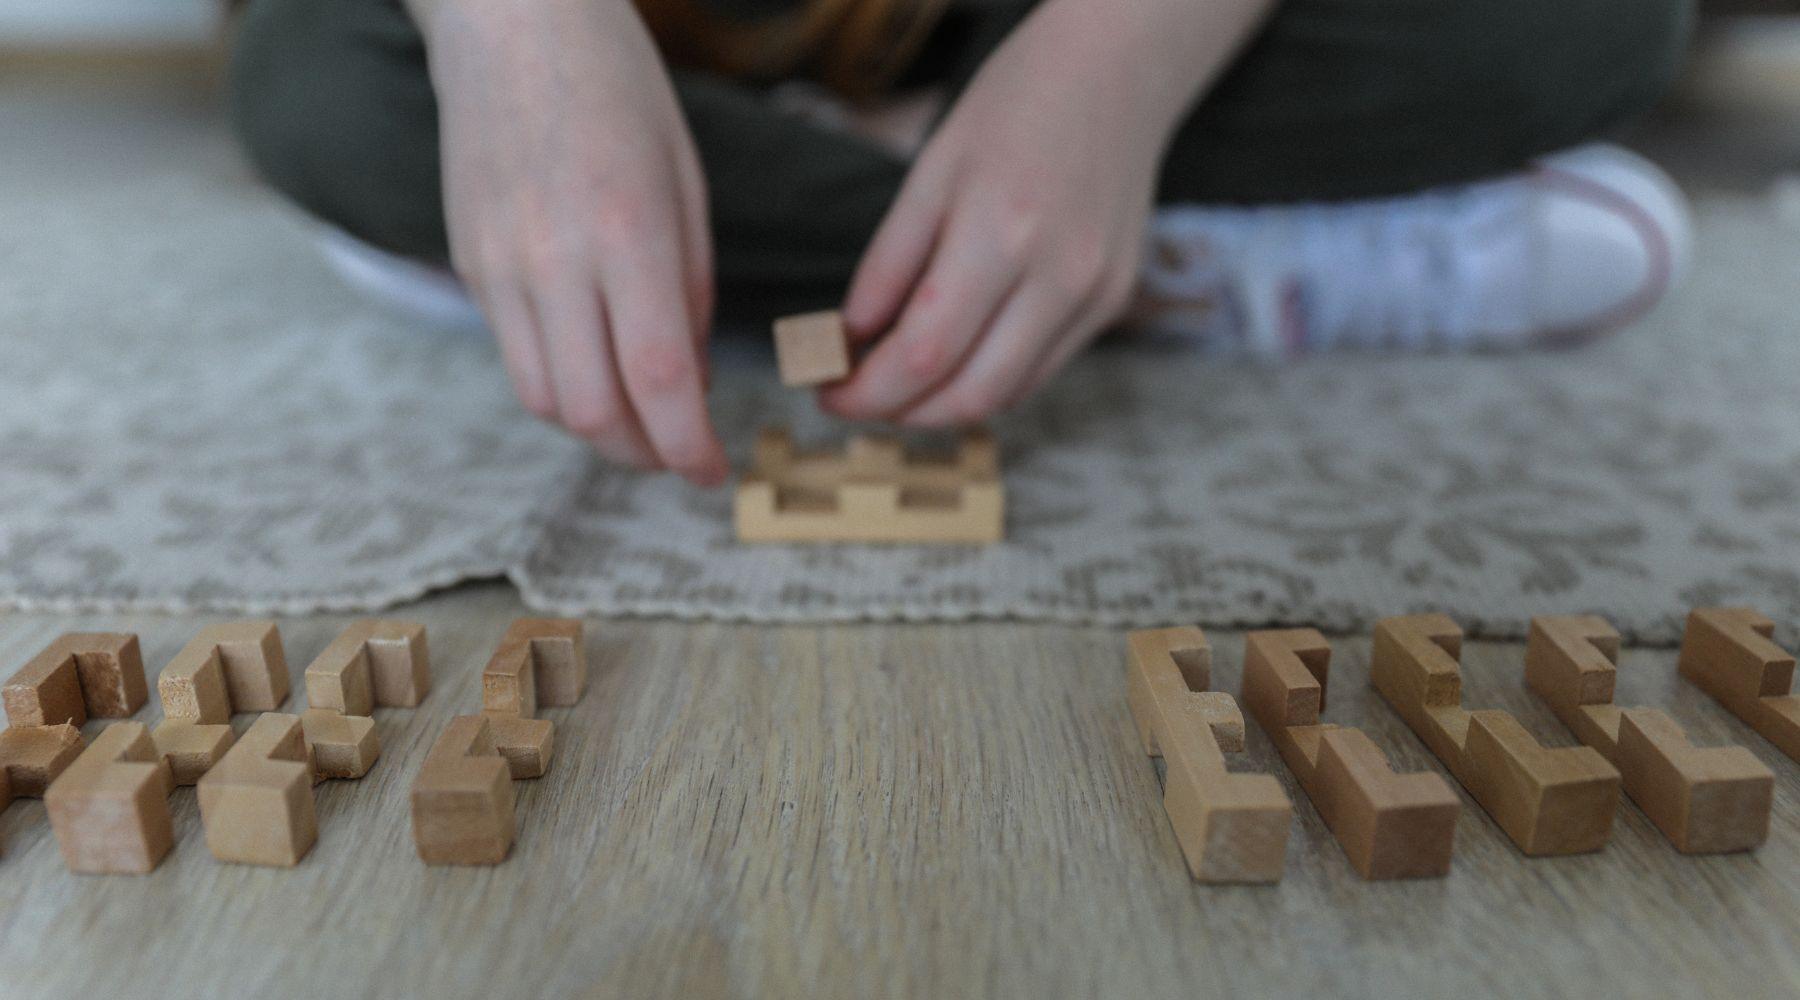 child playing with wooden brain teaser puzzle toy